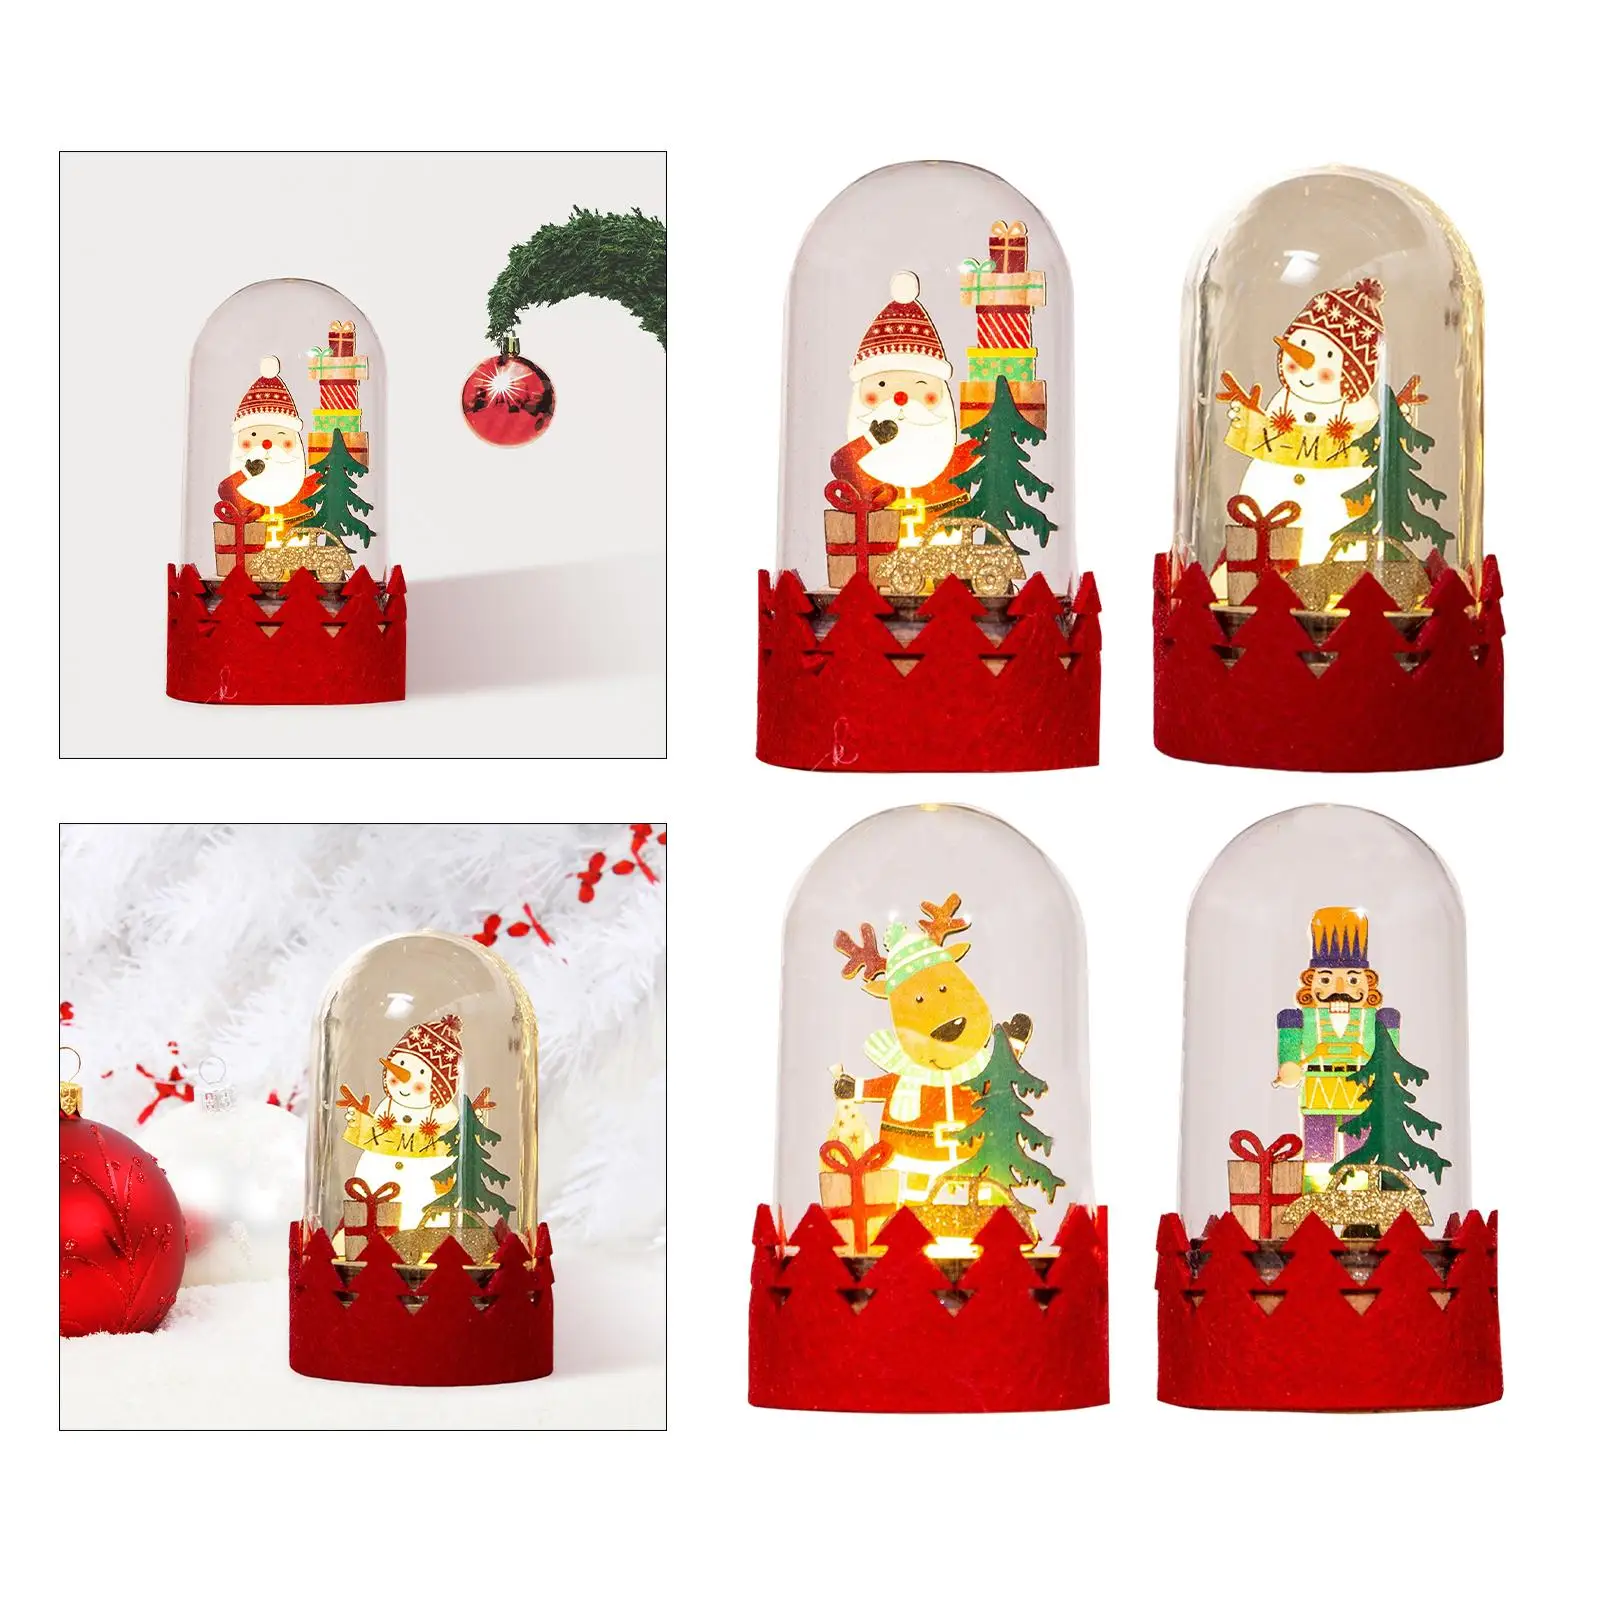 Christmas Lantern Lamp Night Light Battery Operated Decorative for Table Living Room Fireplace Decor Kids New Year Gifts